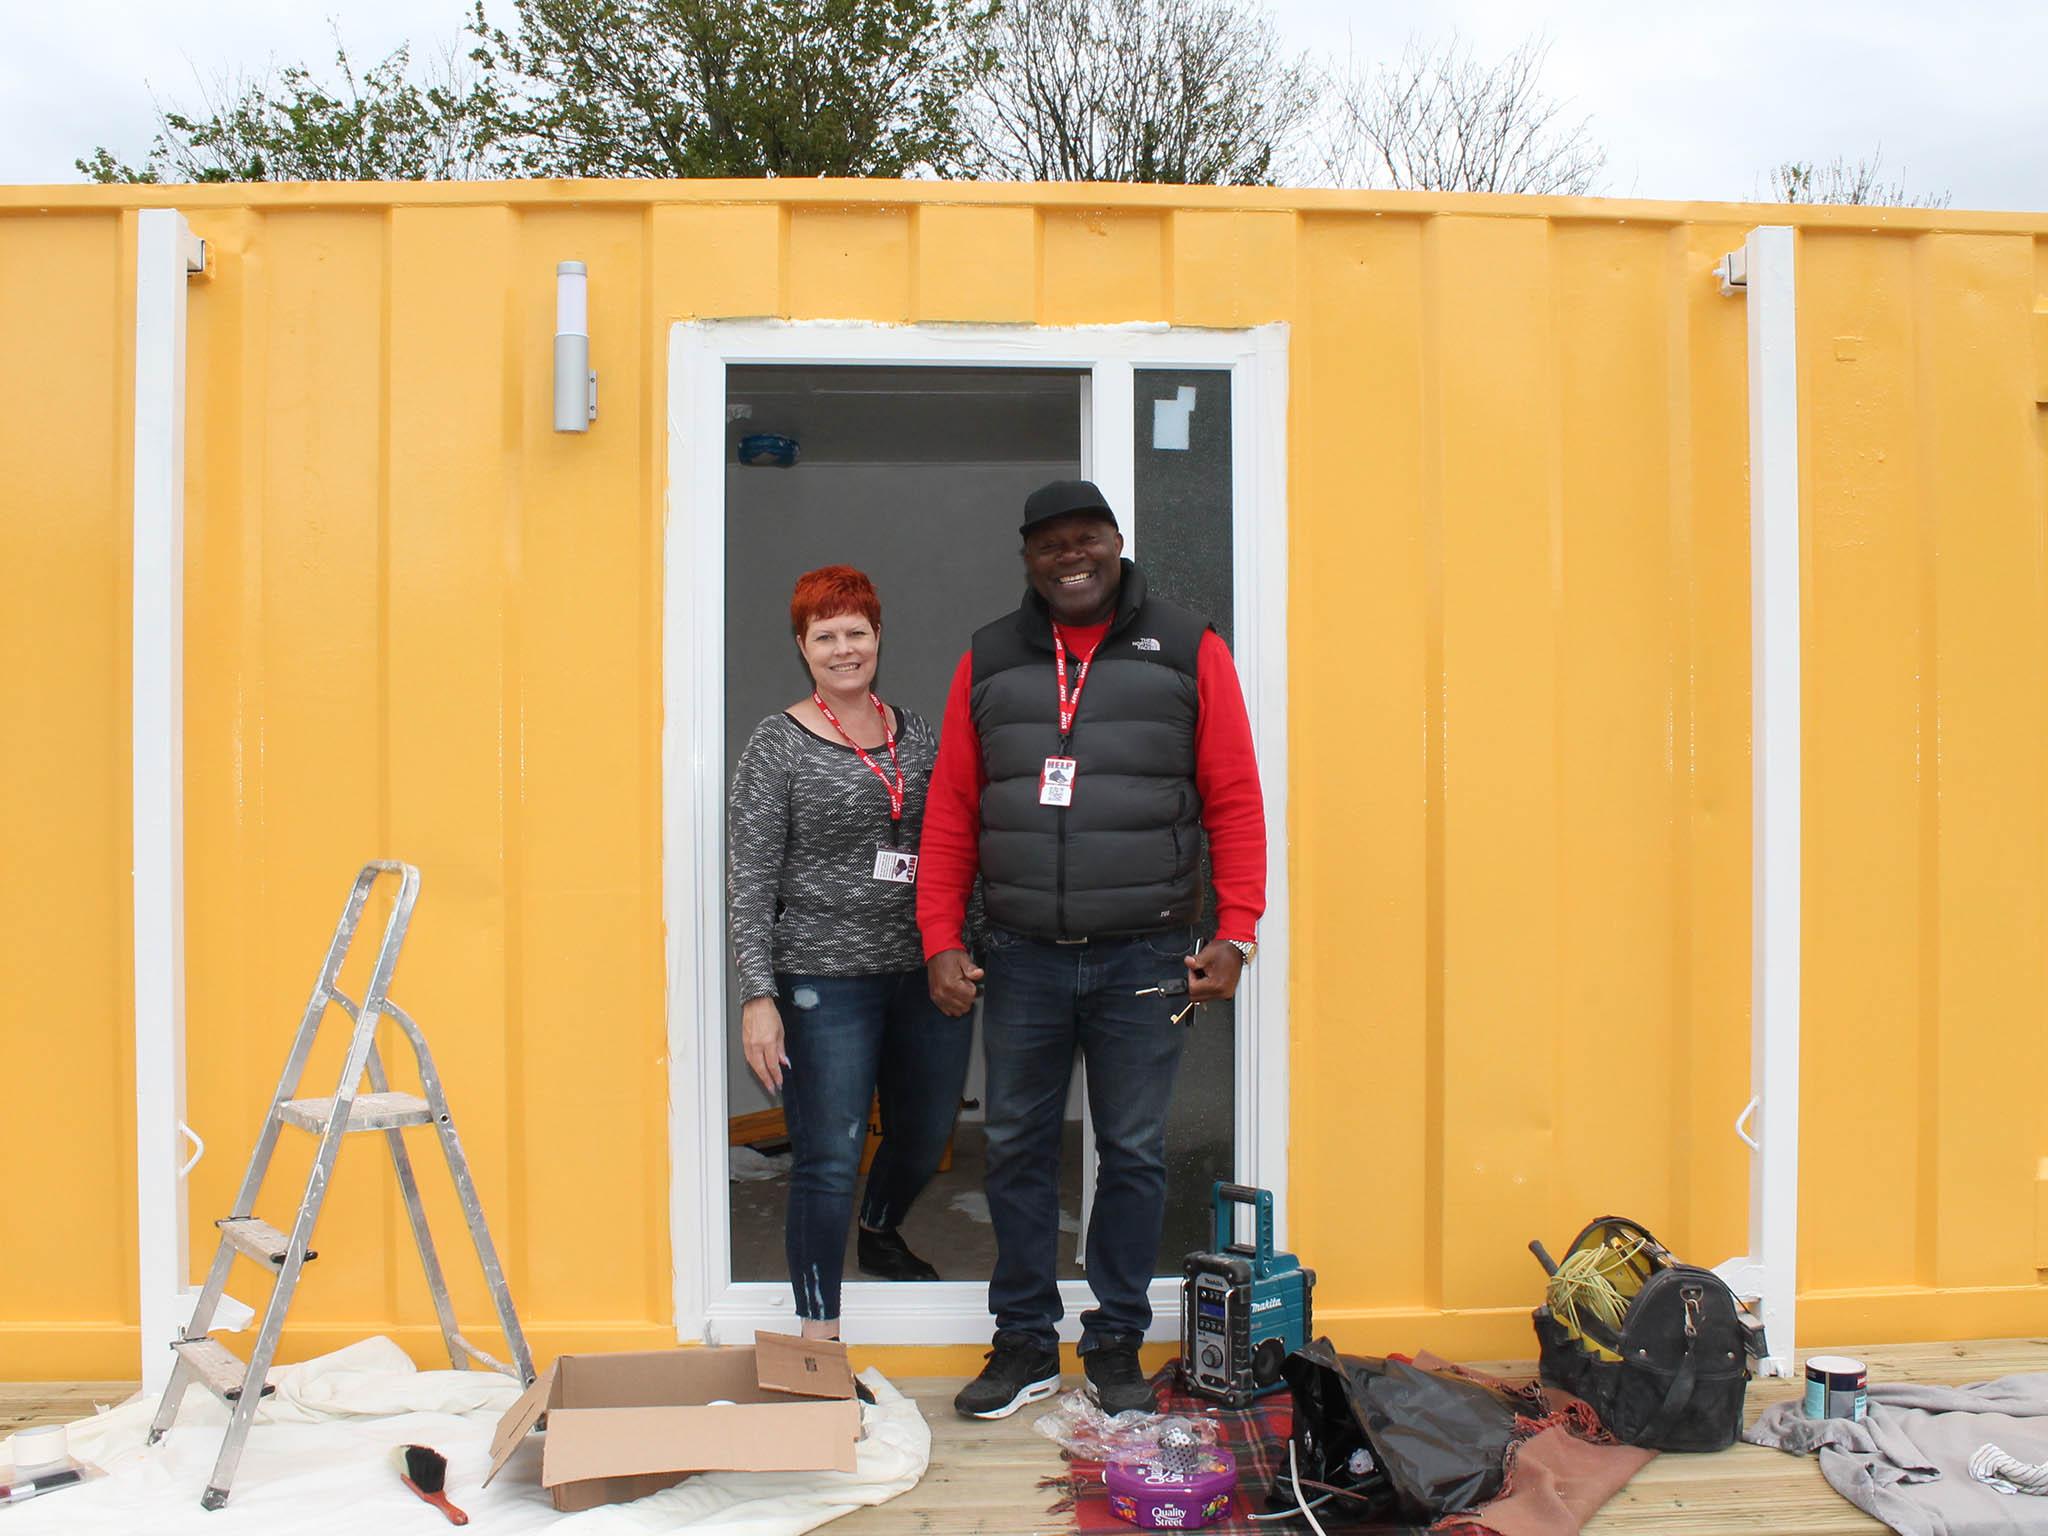 Jasper Thompson and Julie Dempster are creating shelters out of shipping containers for the homeless